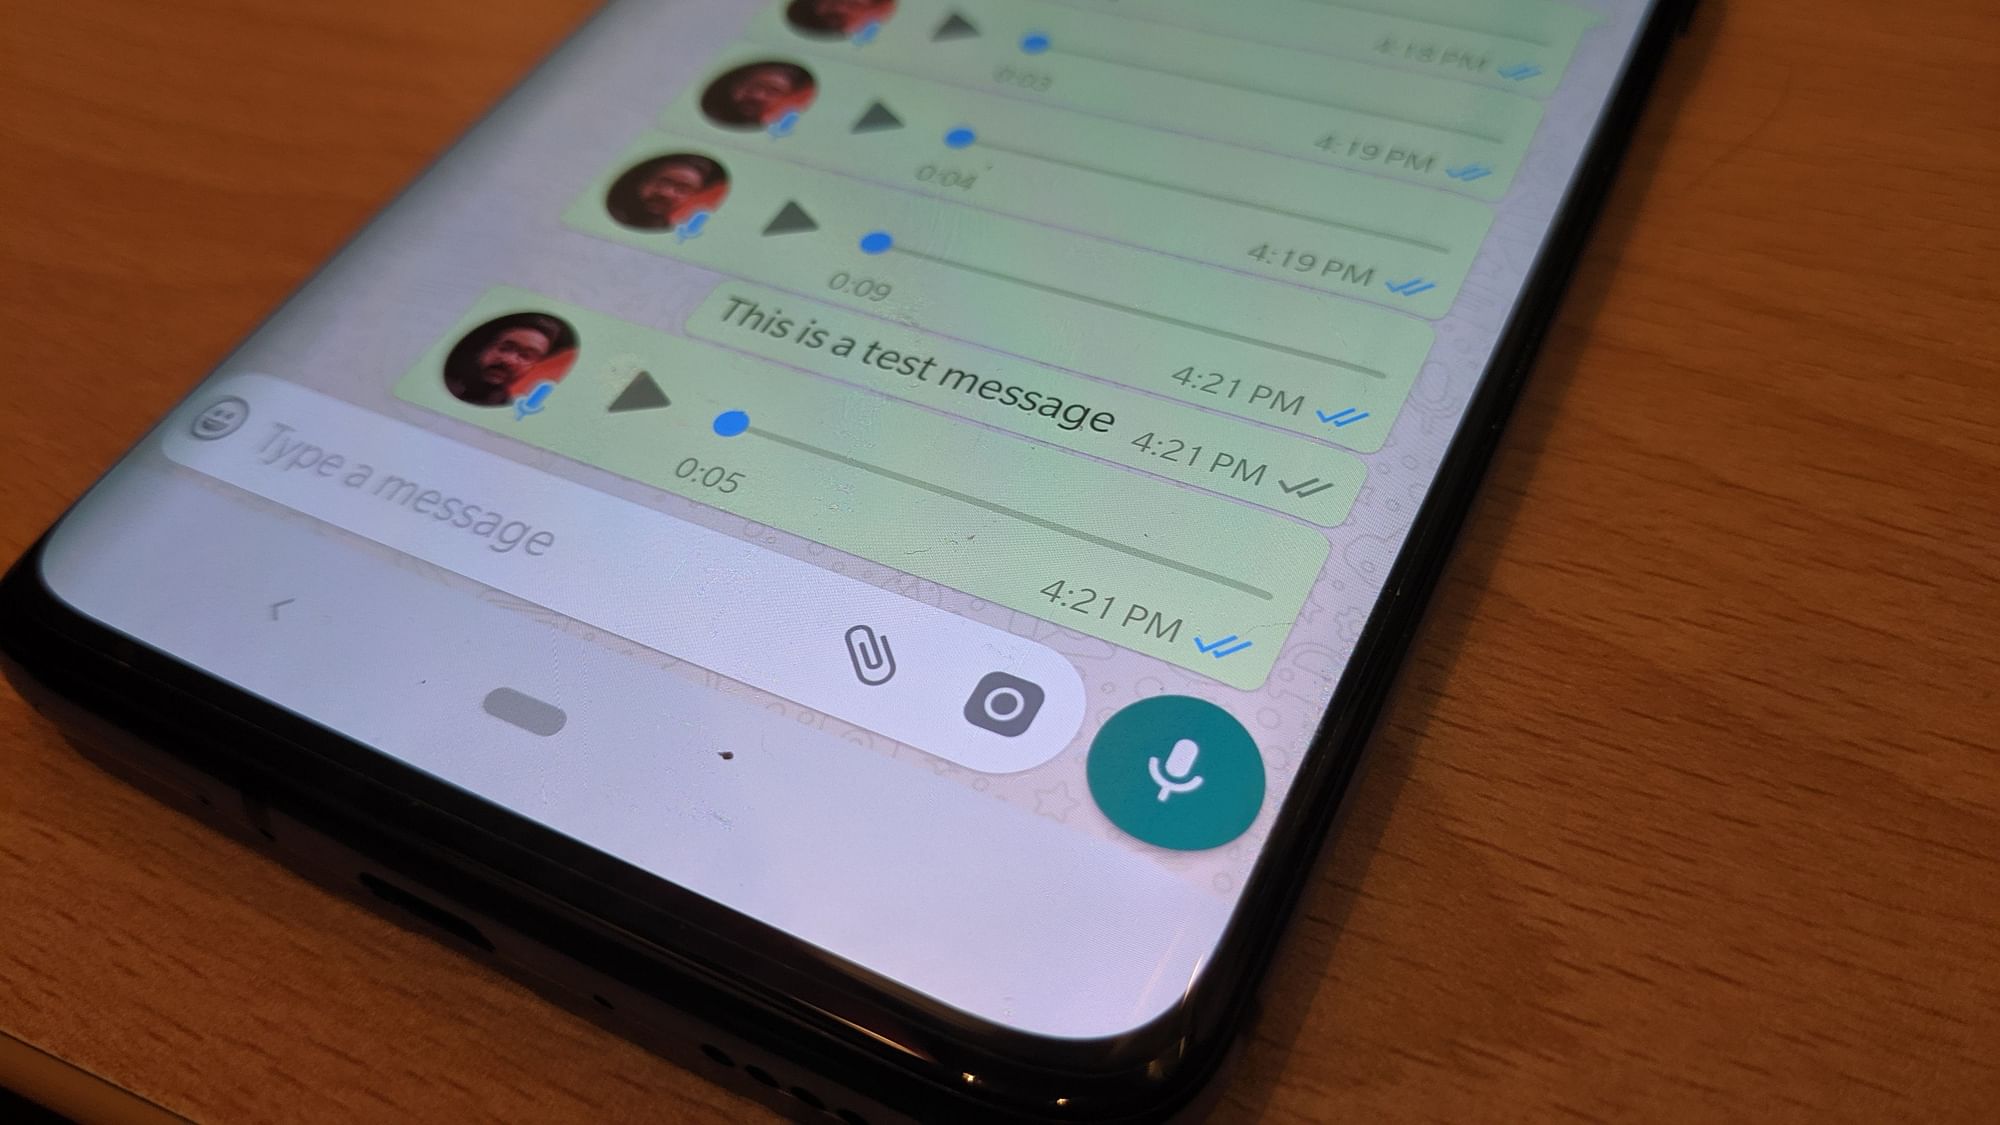 WhatsApp lets you send audio notes to people.